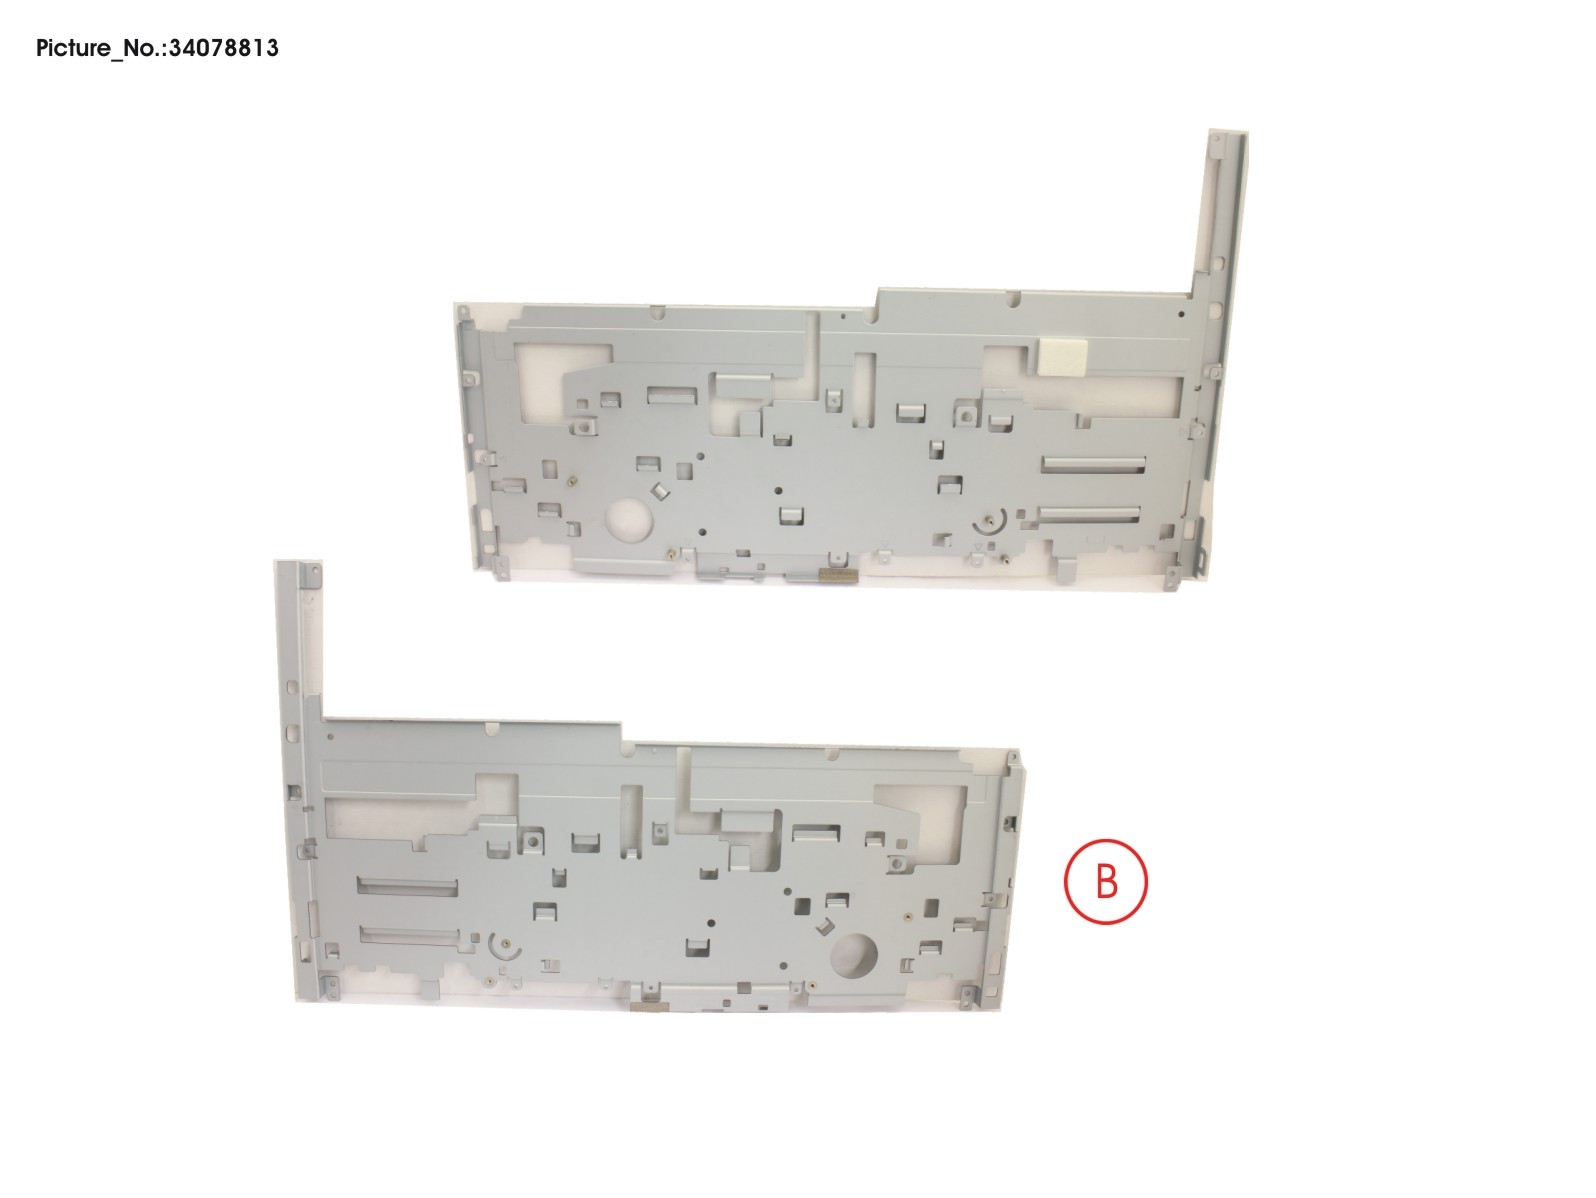 KEYBOARD SUPPORT PLATE FOR SSD